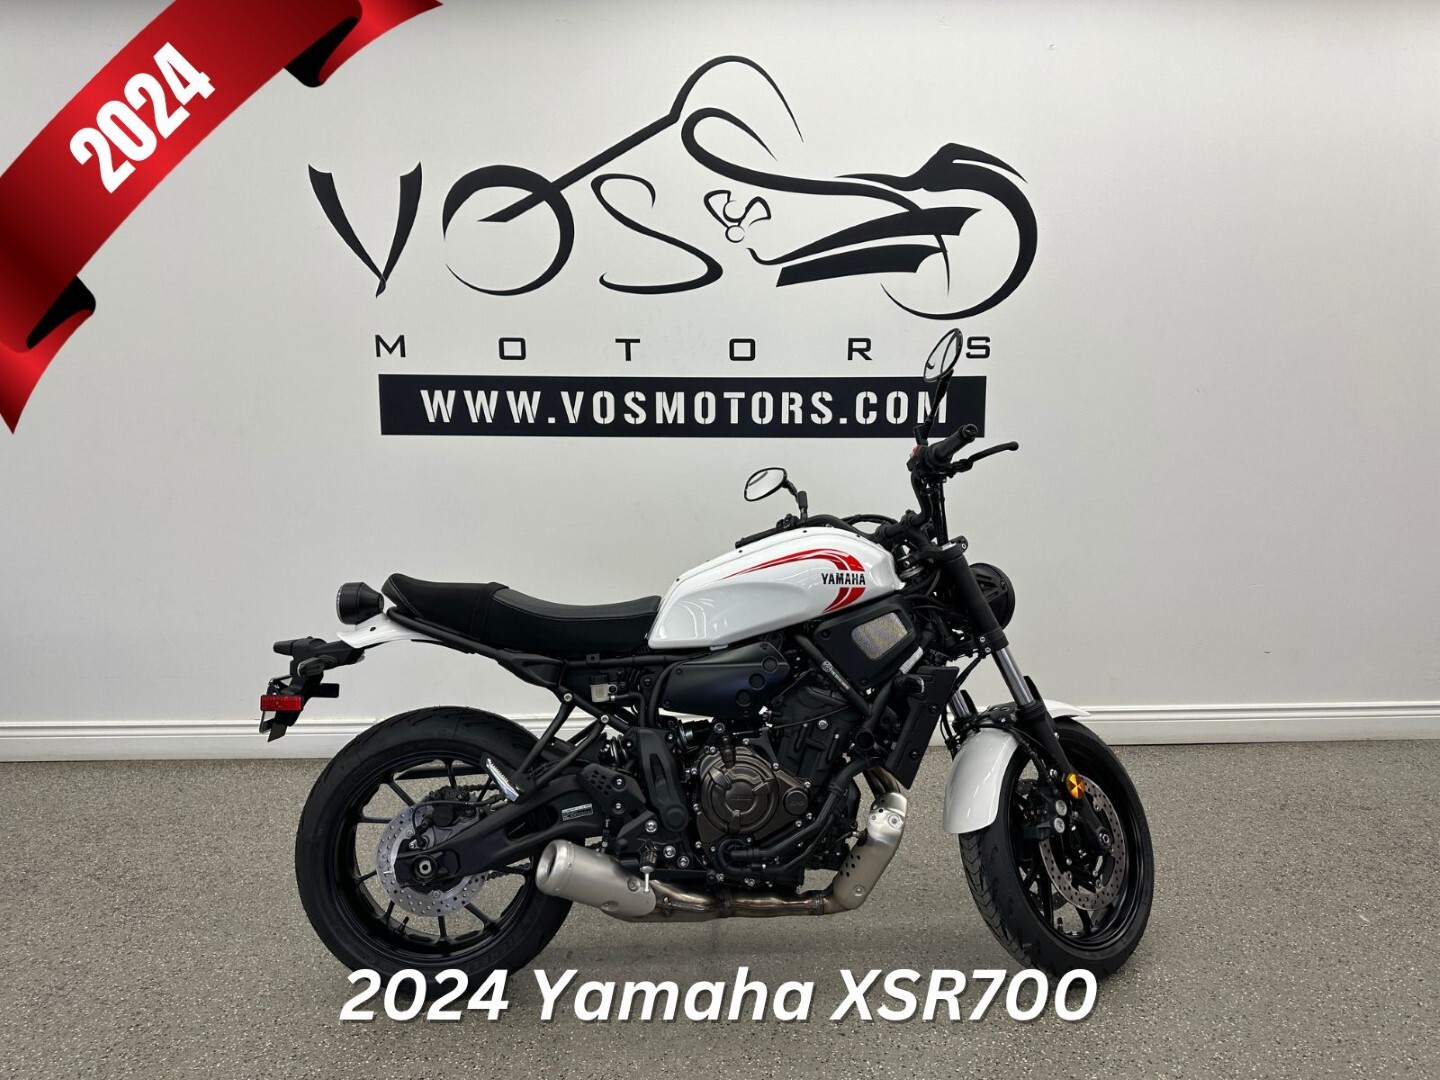 2024 Yamaha XSR700ARW XSR700ARW - V6018 - -No Payments for 1 Year**